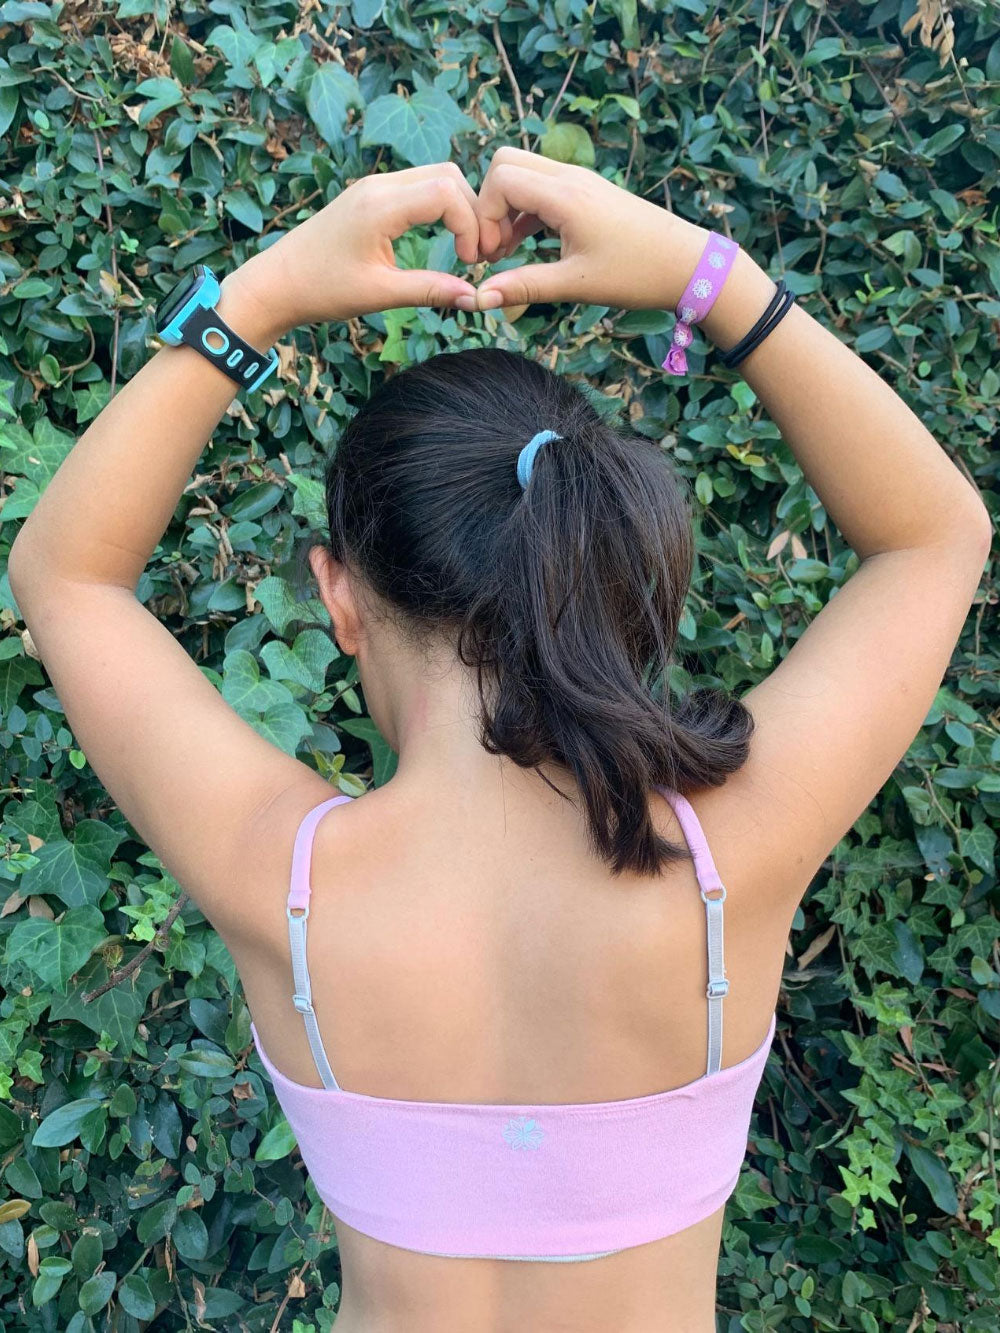 Girl in a ponytail wearing a pink Bleuet Bleum ultra-soft seamless girls first bra and training bra in a garden view from back.  